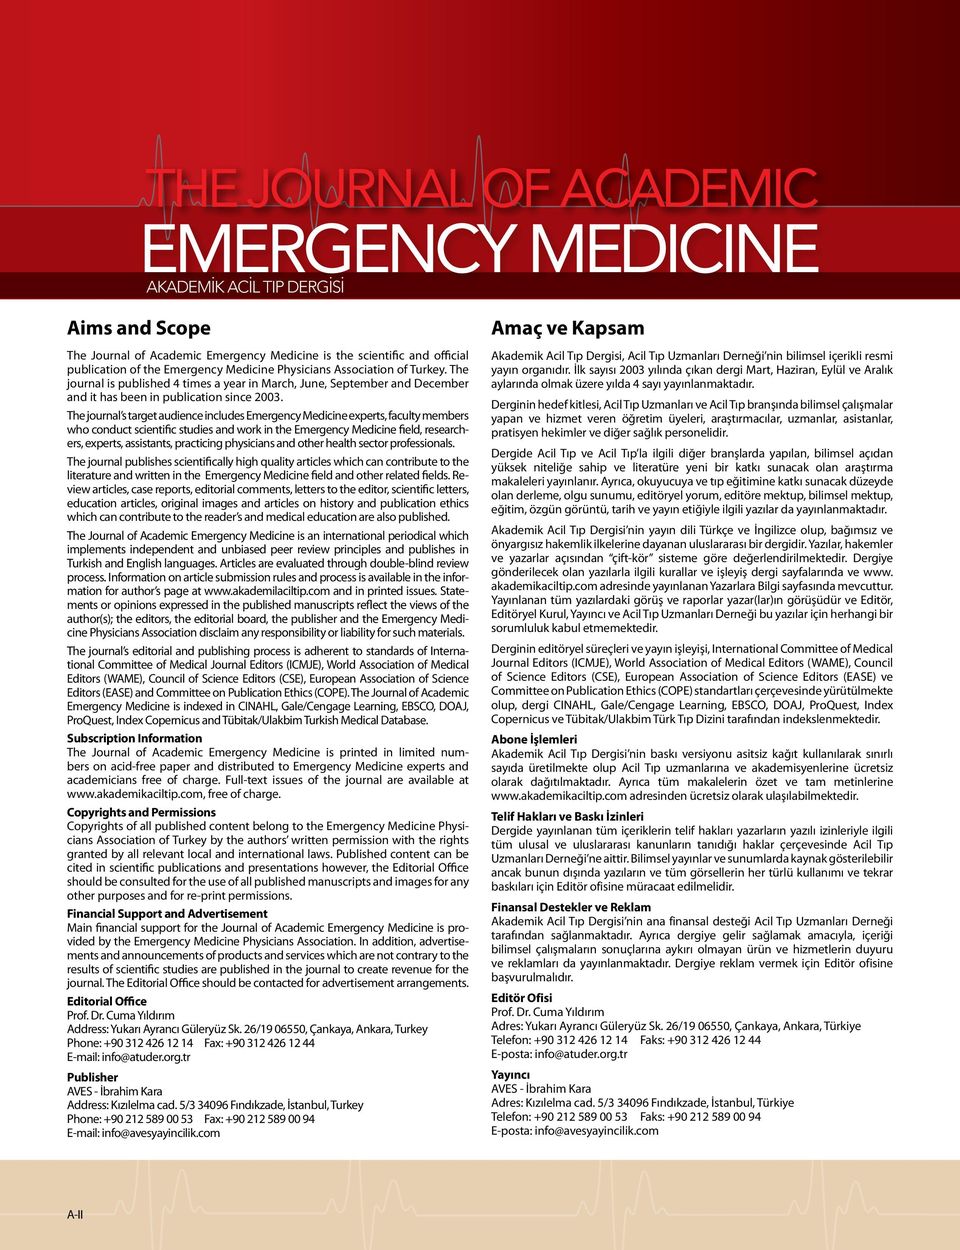 The journal s target audience includes Emergency Medicine experts, faculty members who conduct scientific studies and work in the Emergency Medicine field, researchers, experts, assistants,